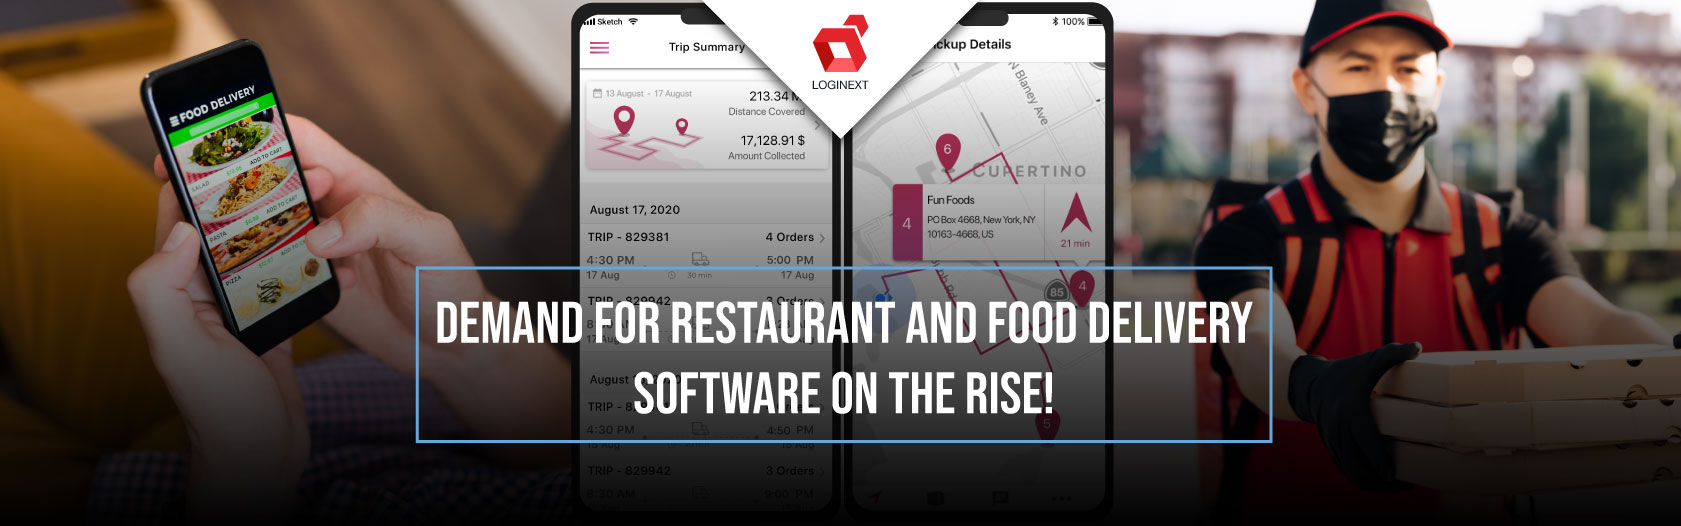 Demand For Restaurant and Food Delivery Software On The Rise!